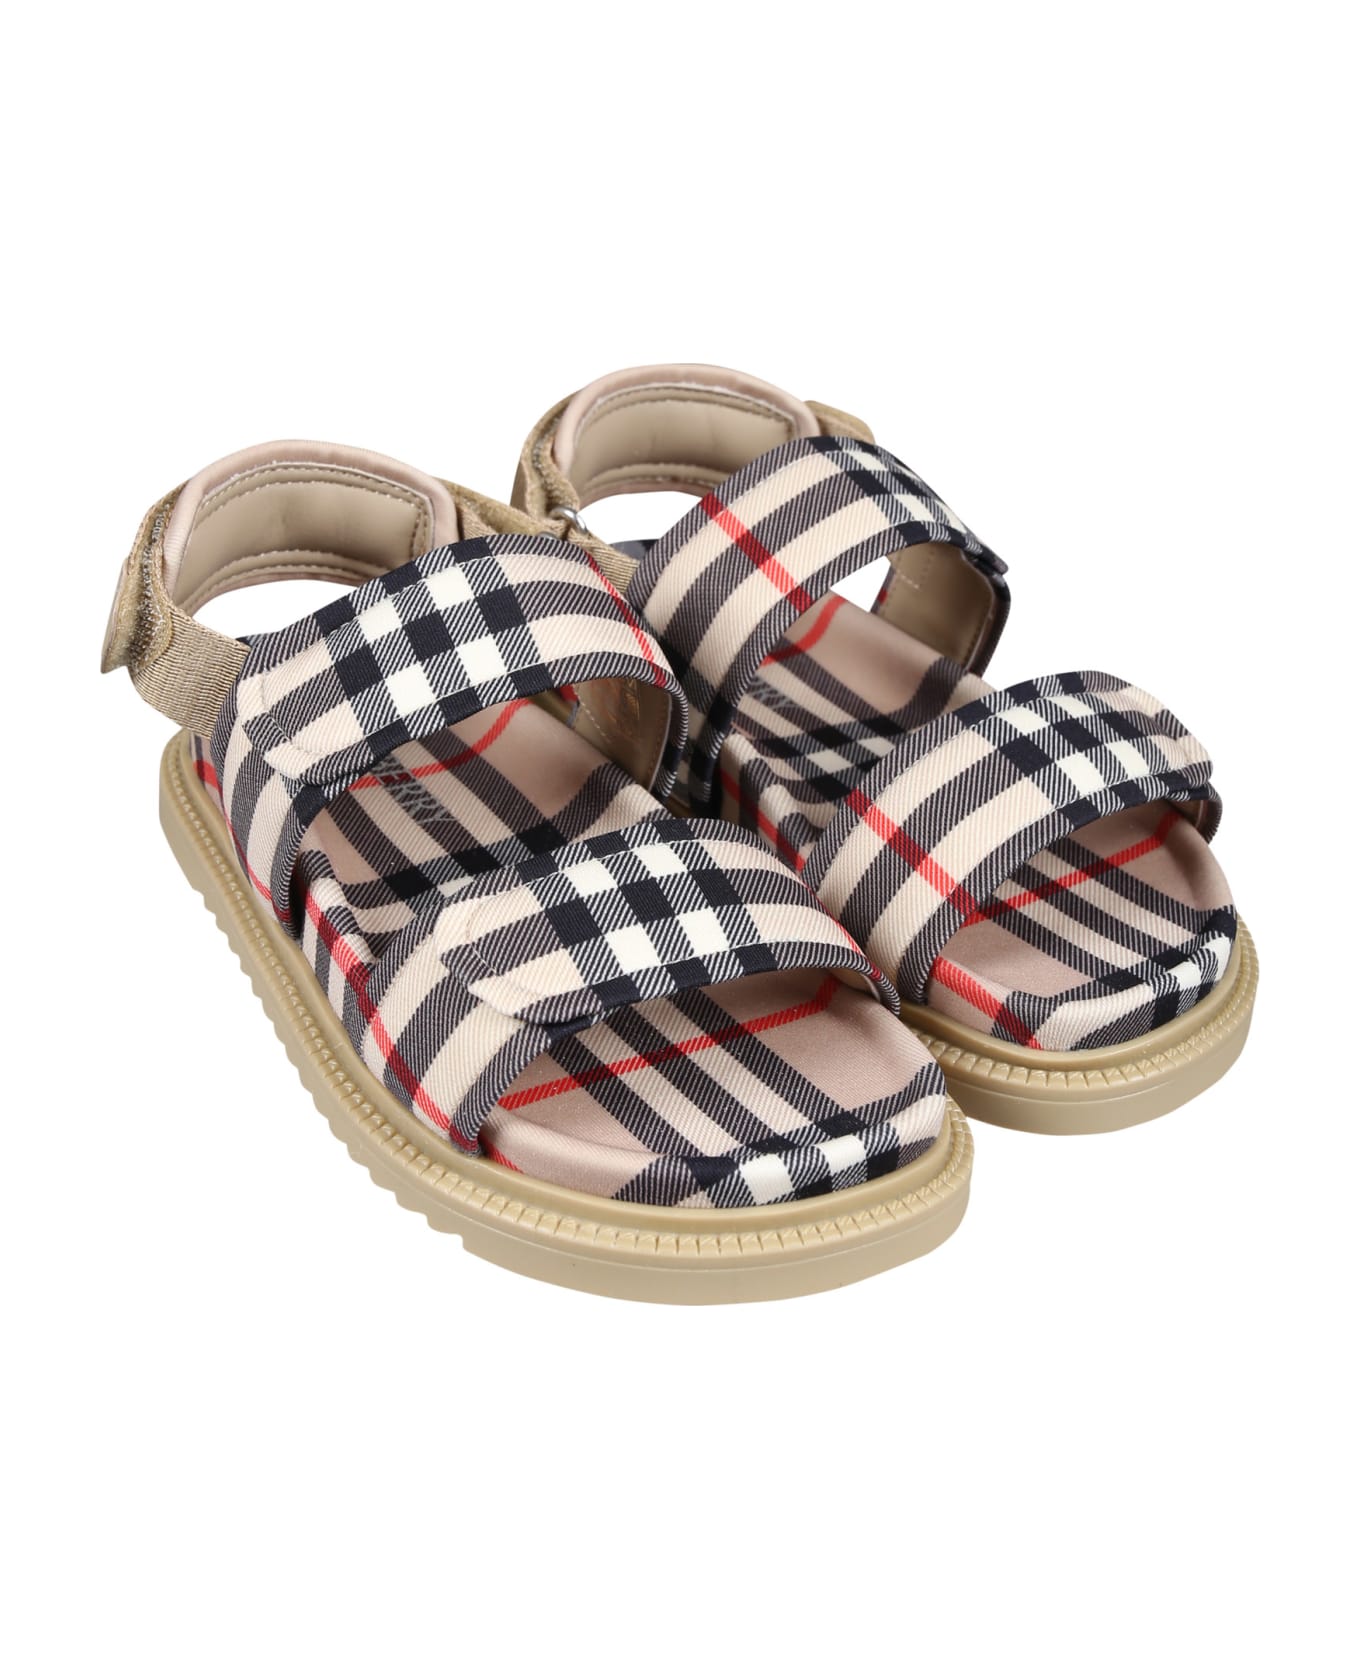 Burberry Beige Sandals For Kids With Vintage Check - Beige